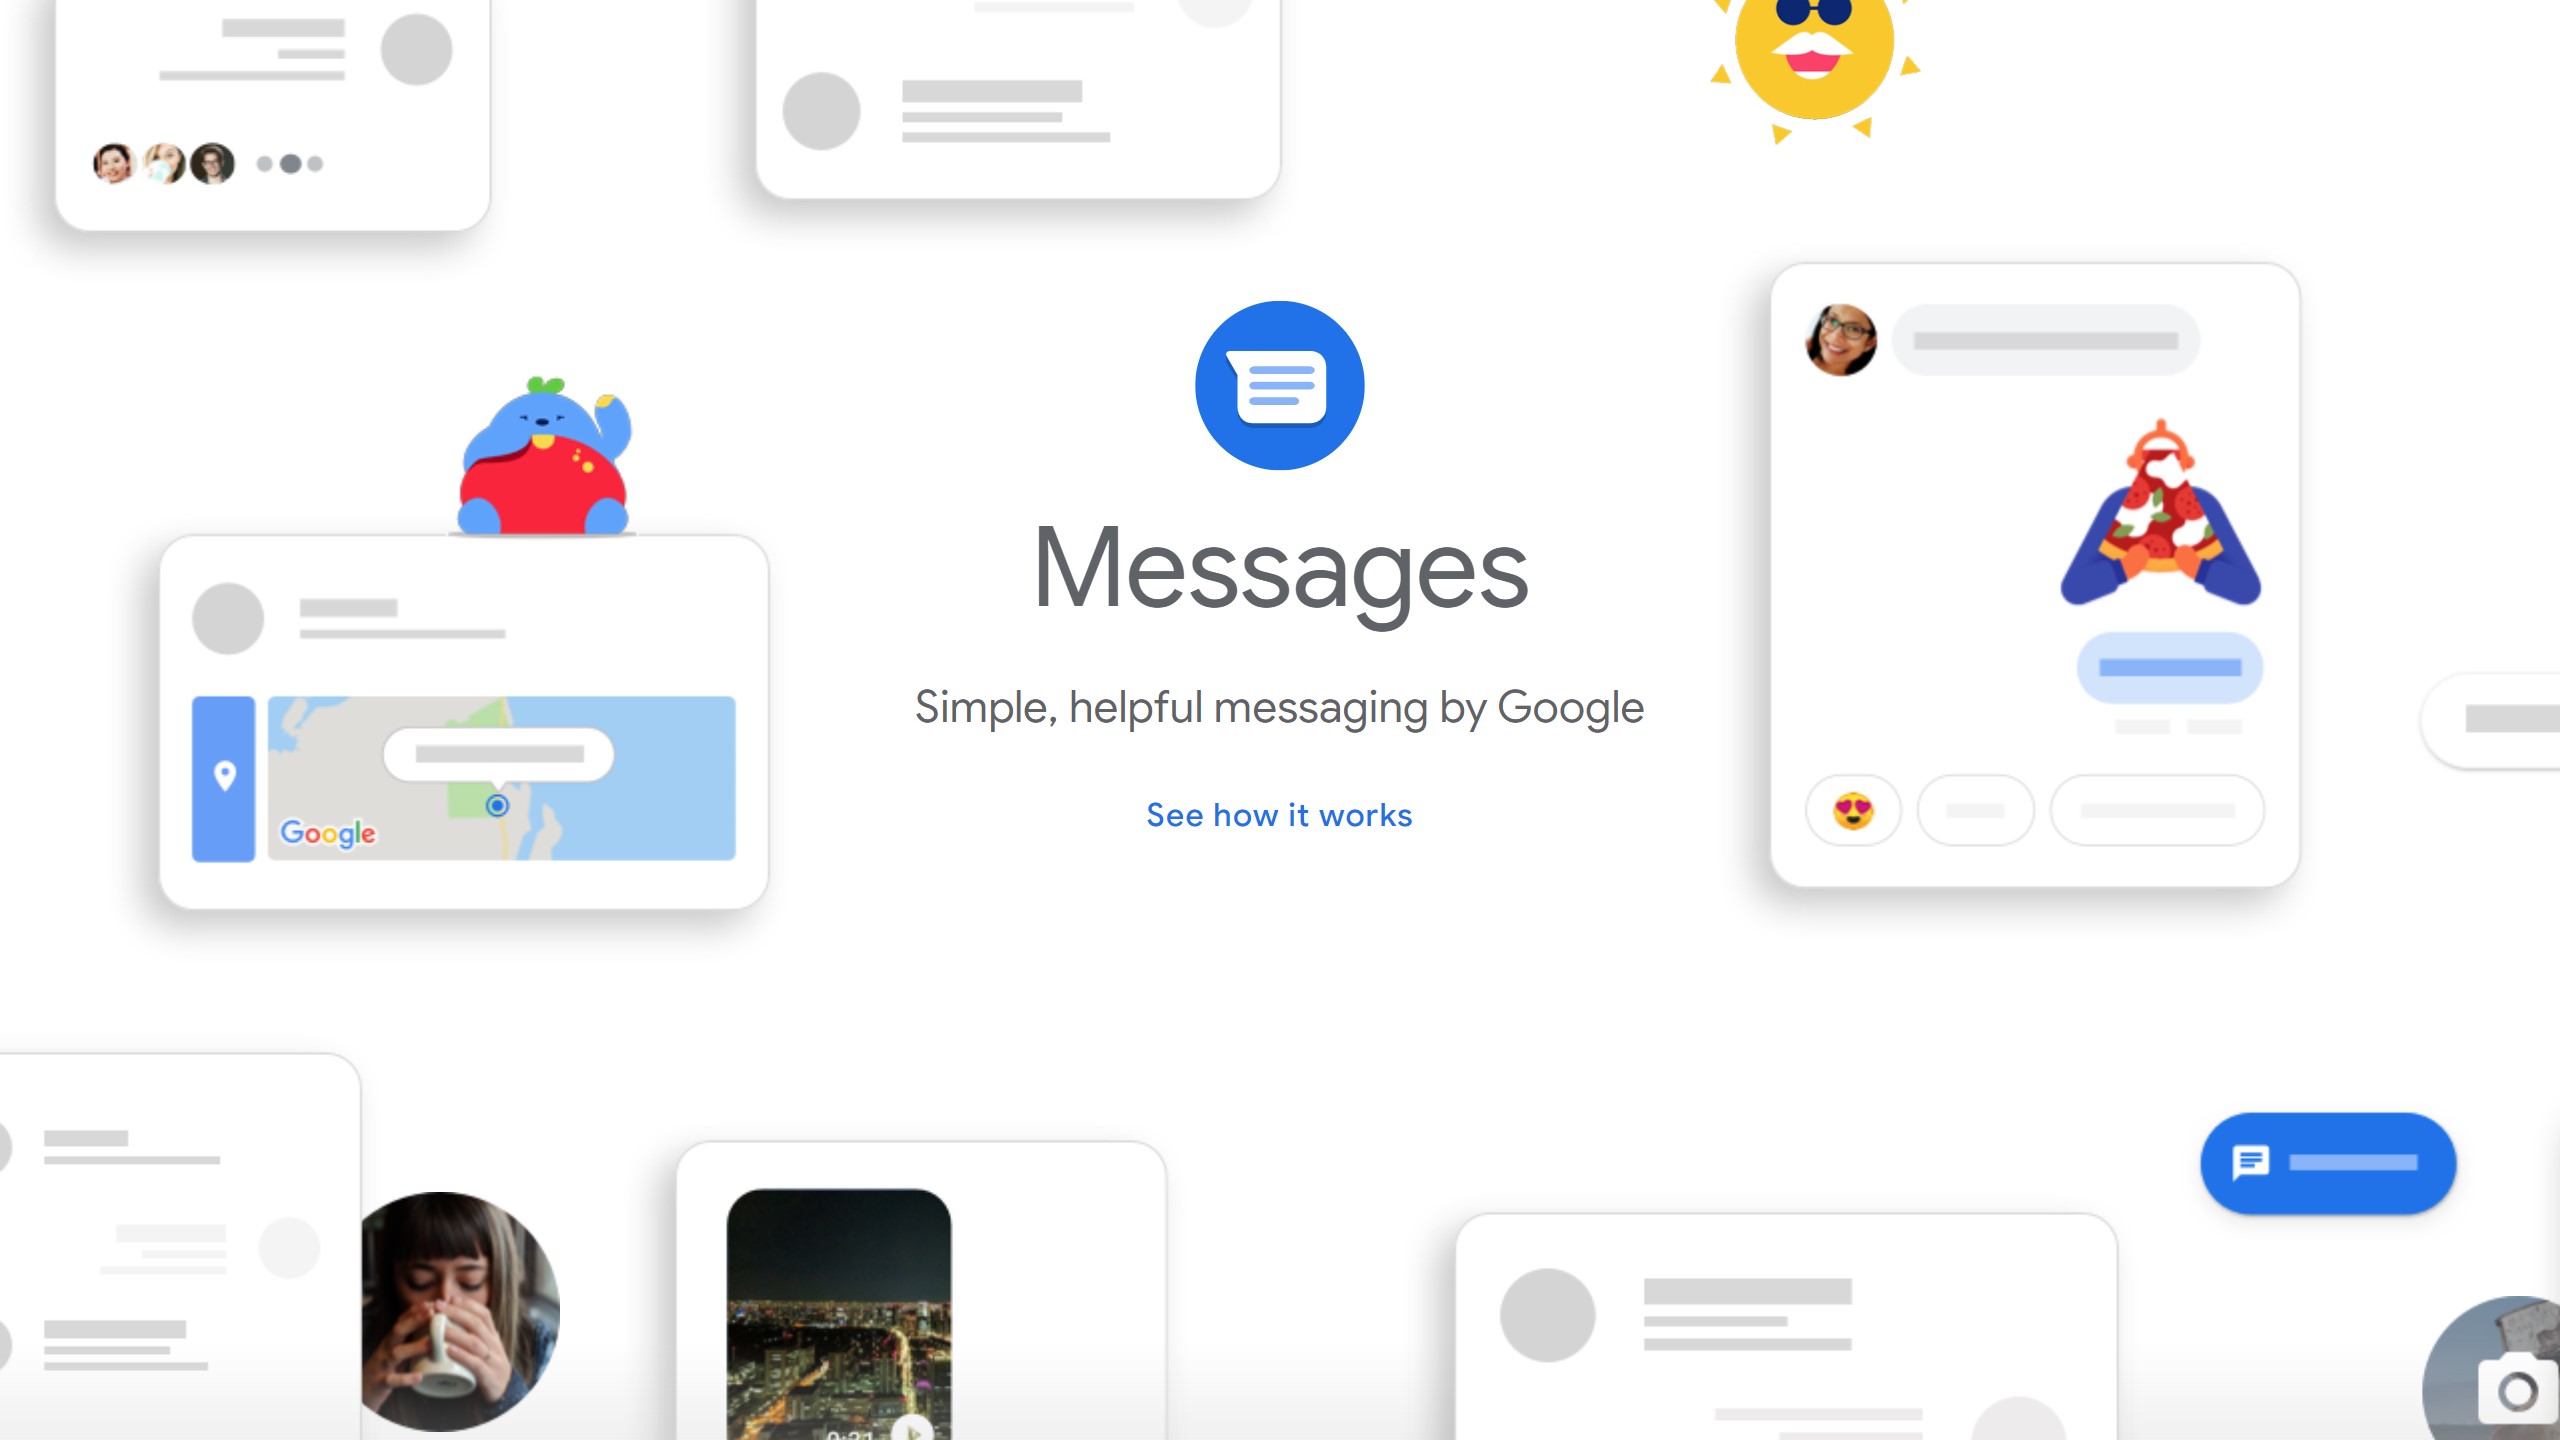 Commentary Here’s what you need to know about the new Google Messages